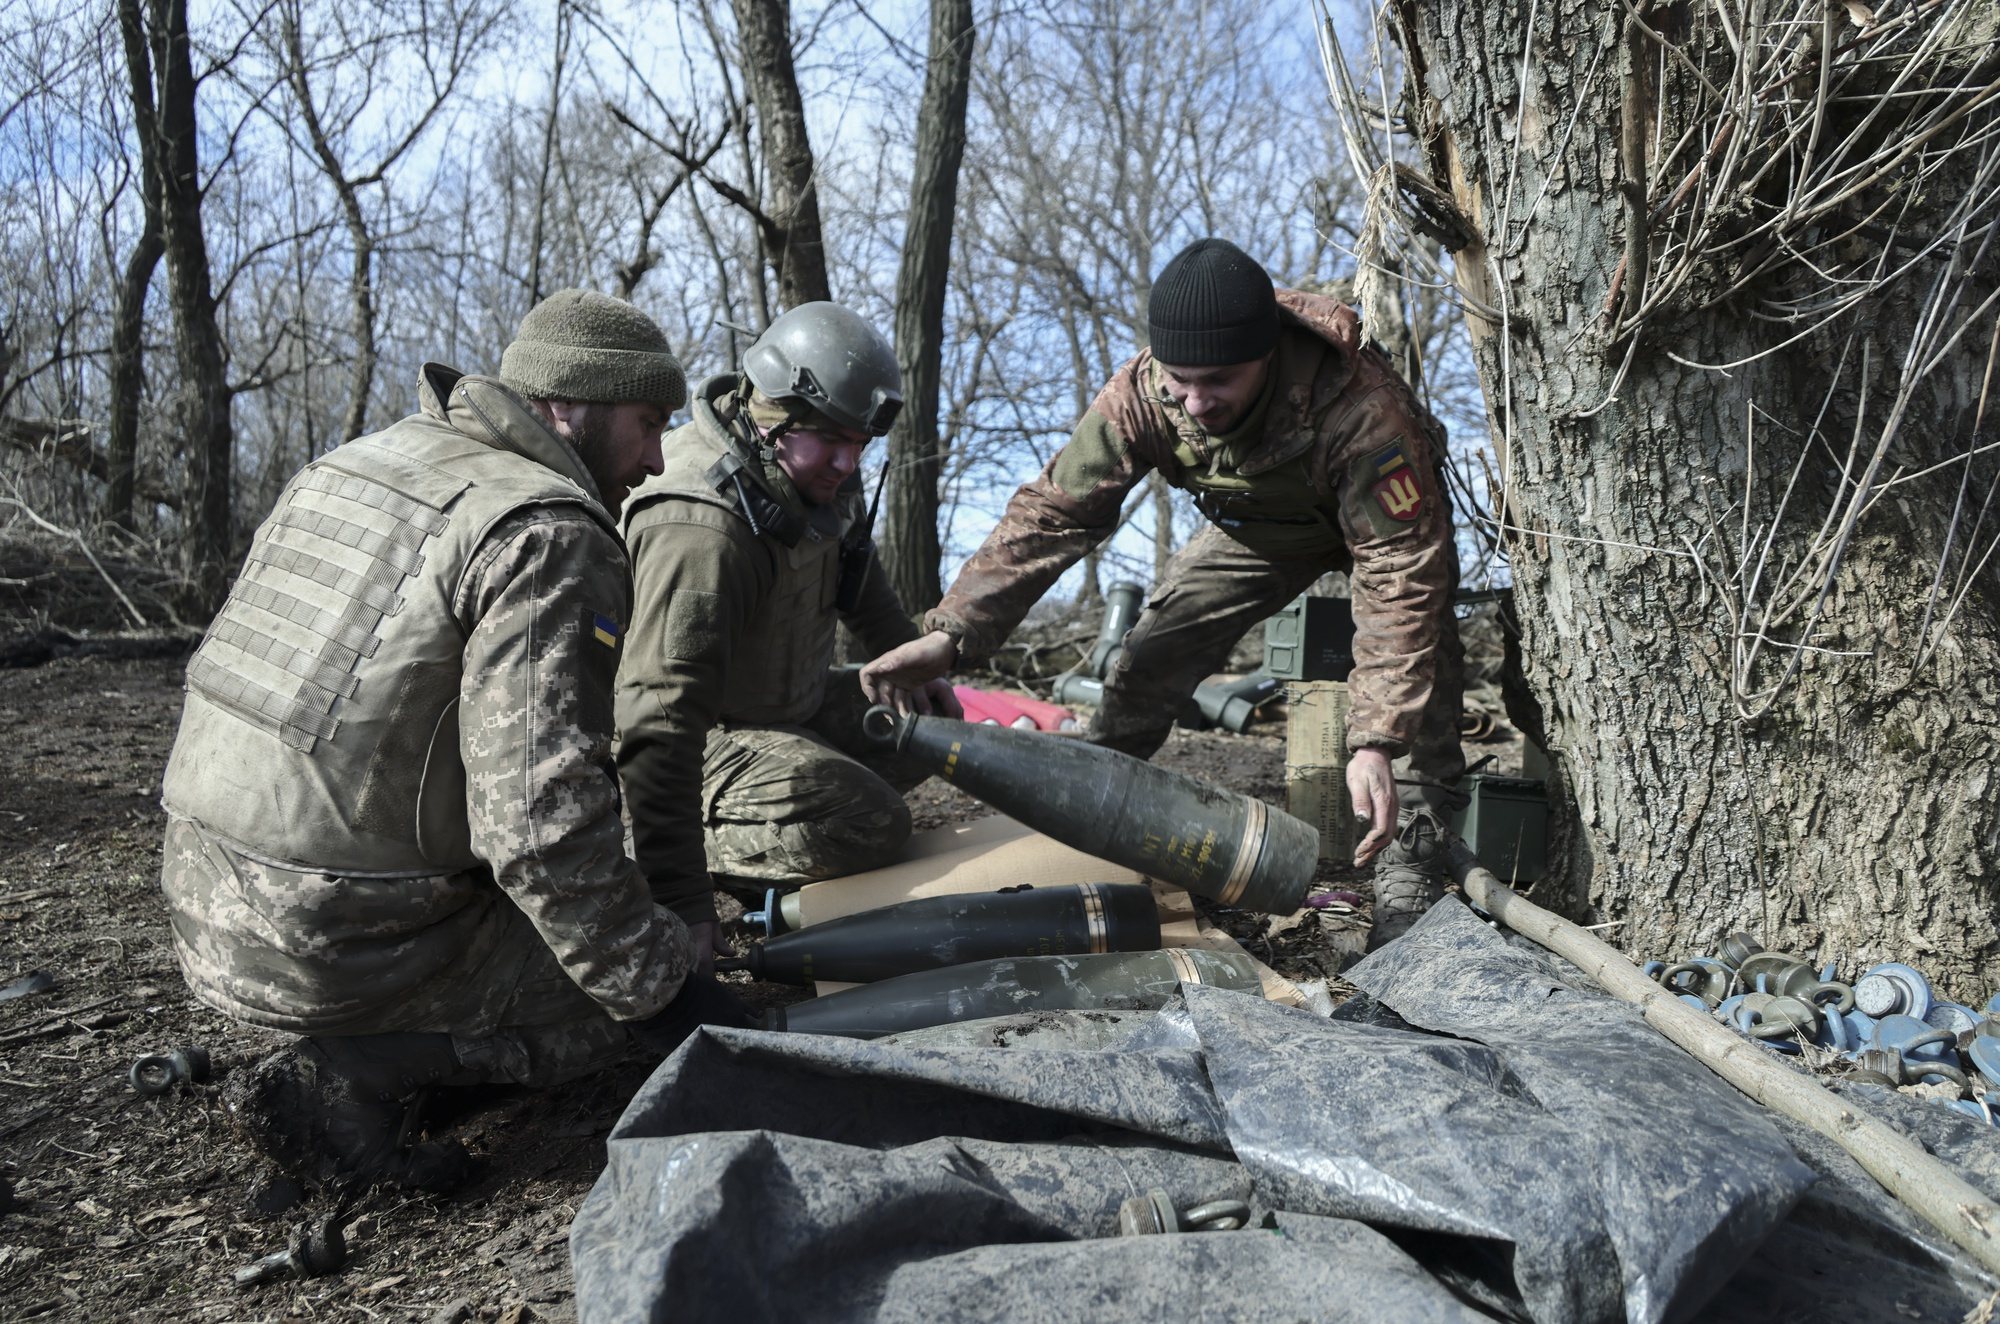 epa10500959 Ukrainian soldiers prepare munitions at their position in the Zaporizhzhia area, Ukraine, 02 March 2023 (issued 03 March 2023) Russian troops entered Ukrainian territory on 24 February 2022, starting a conflict that has provoked destruction and a humanitarian crisis.  EPA/STR